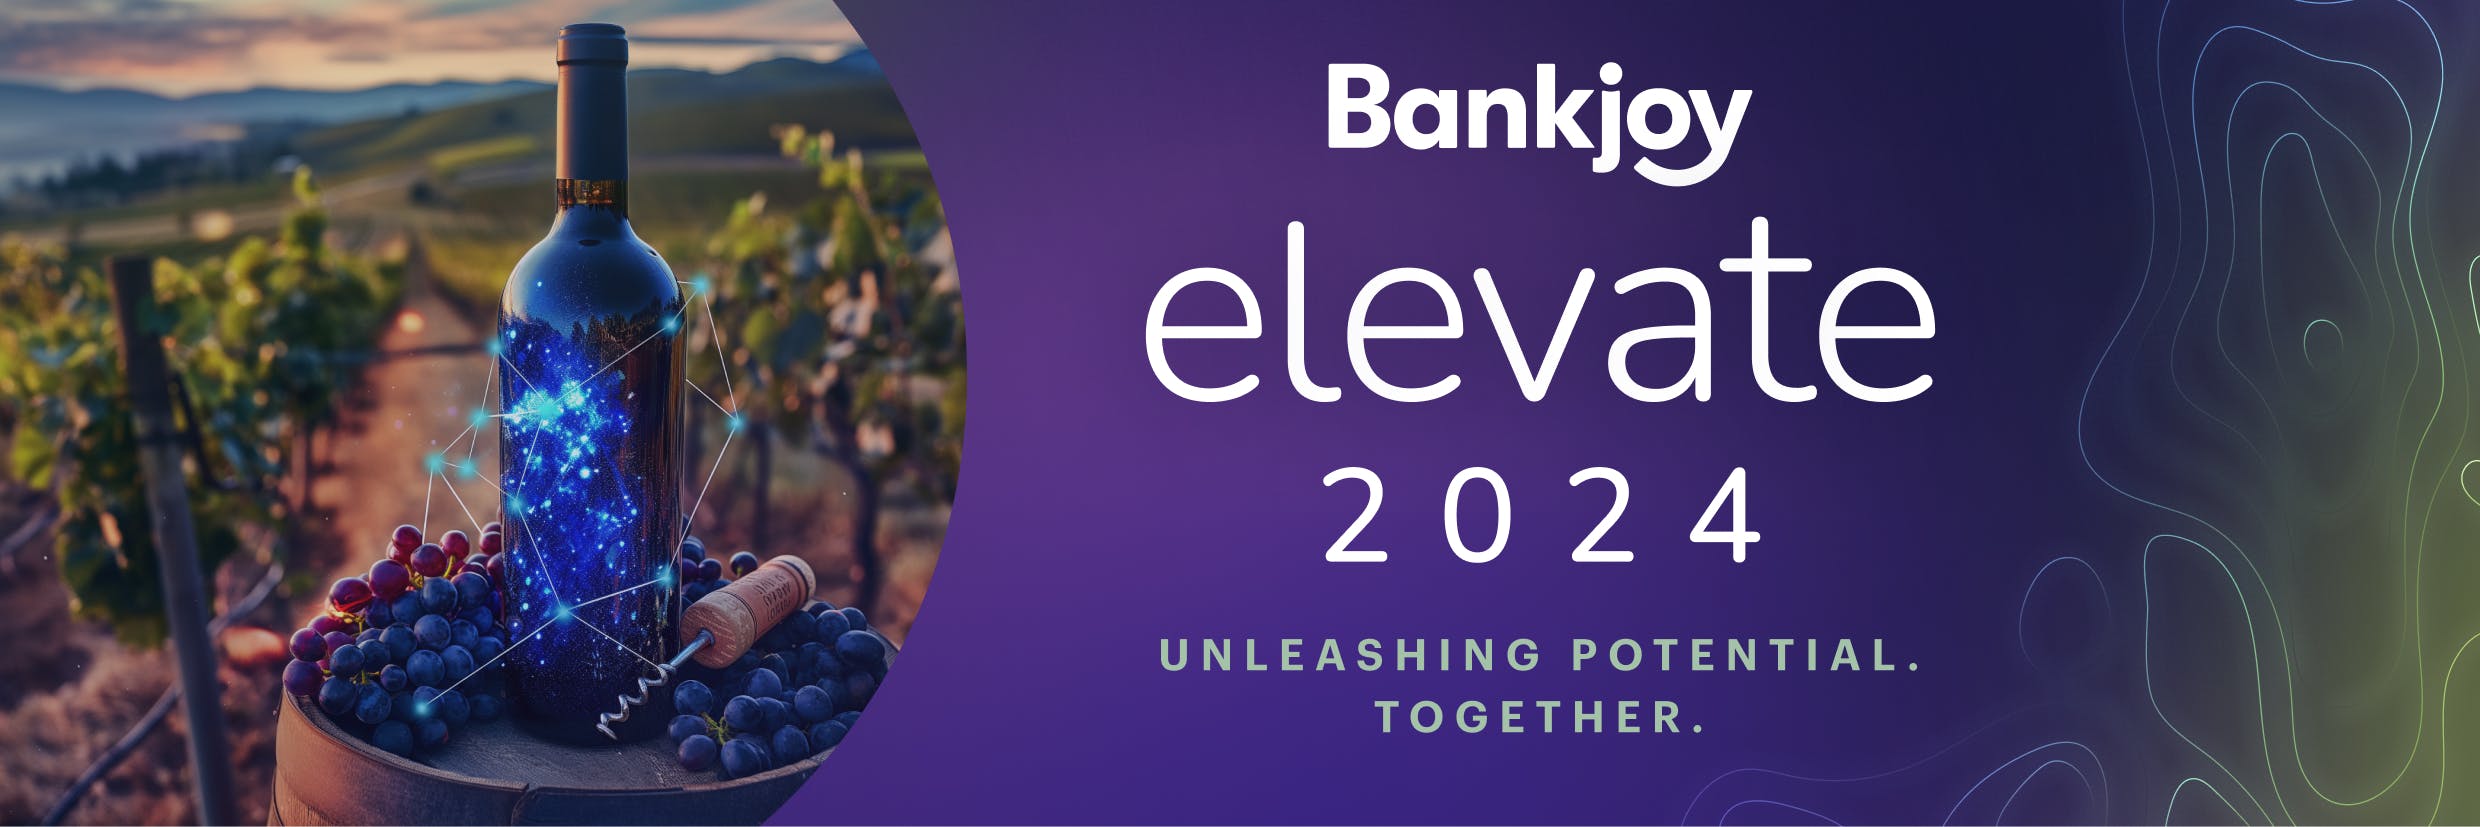 Wine-colored background with an image of a glowing blue bottle of wine on a picturesque vineyard on the left, in the center is the Bankjoy logo, above the text "Elevate 2024. Unleashing Potential. Together."